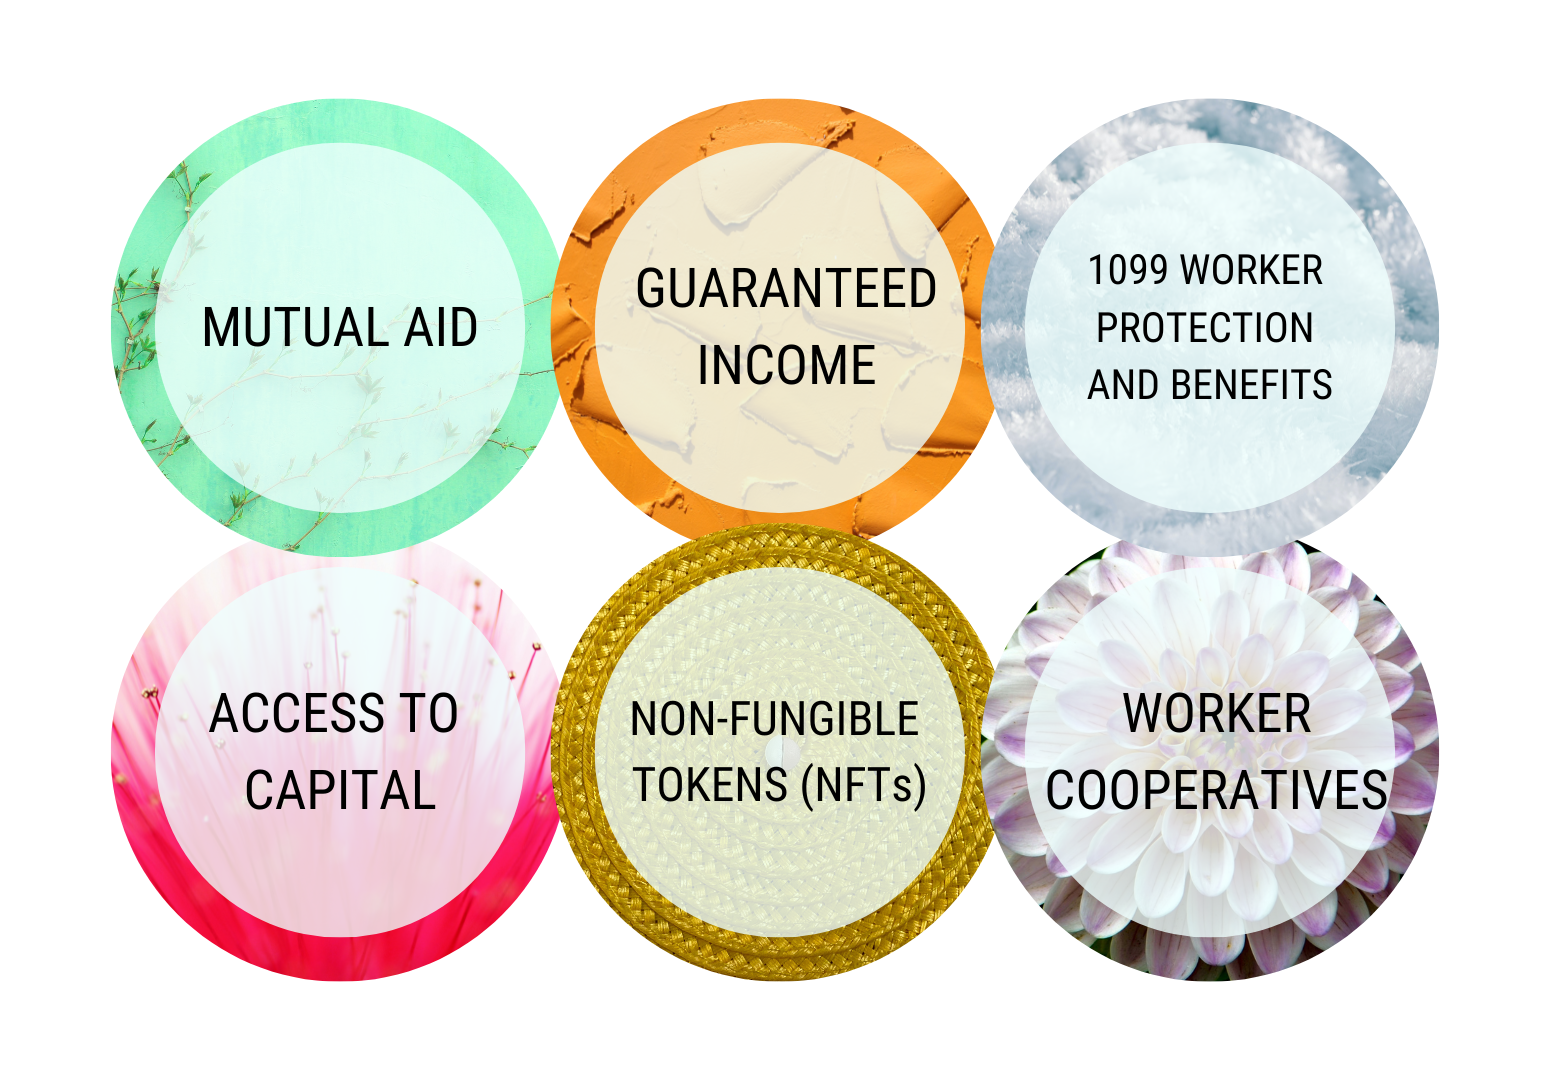 Six circles in two rows with text inside each circle. The text reads, "Mutual Aid," "Guaranteed Income," "1099 Worker Protection and Benefits," "Access to Capital," "Non-Fungible Tokens (NFTs)," and "Worker Cooperatives"